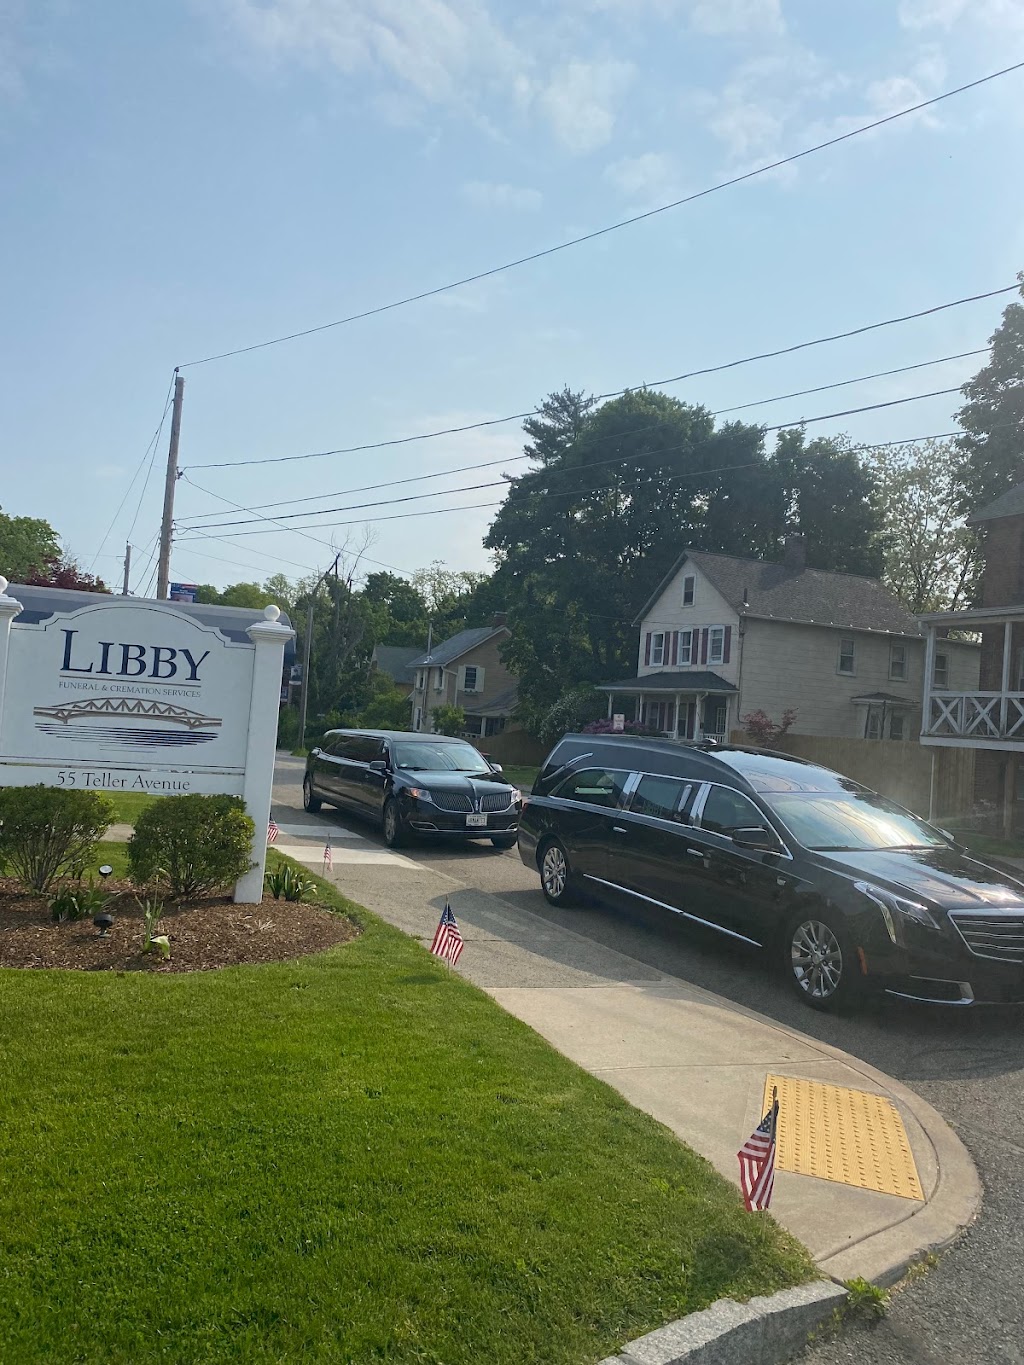 Libby Funeral & Cremation Services | 55 Teller Ave, Beacon, NY 12508 | Phone: (845) 831-0179